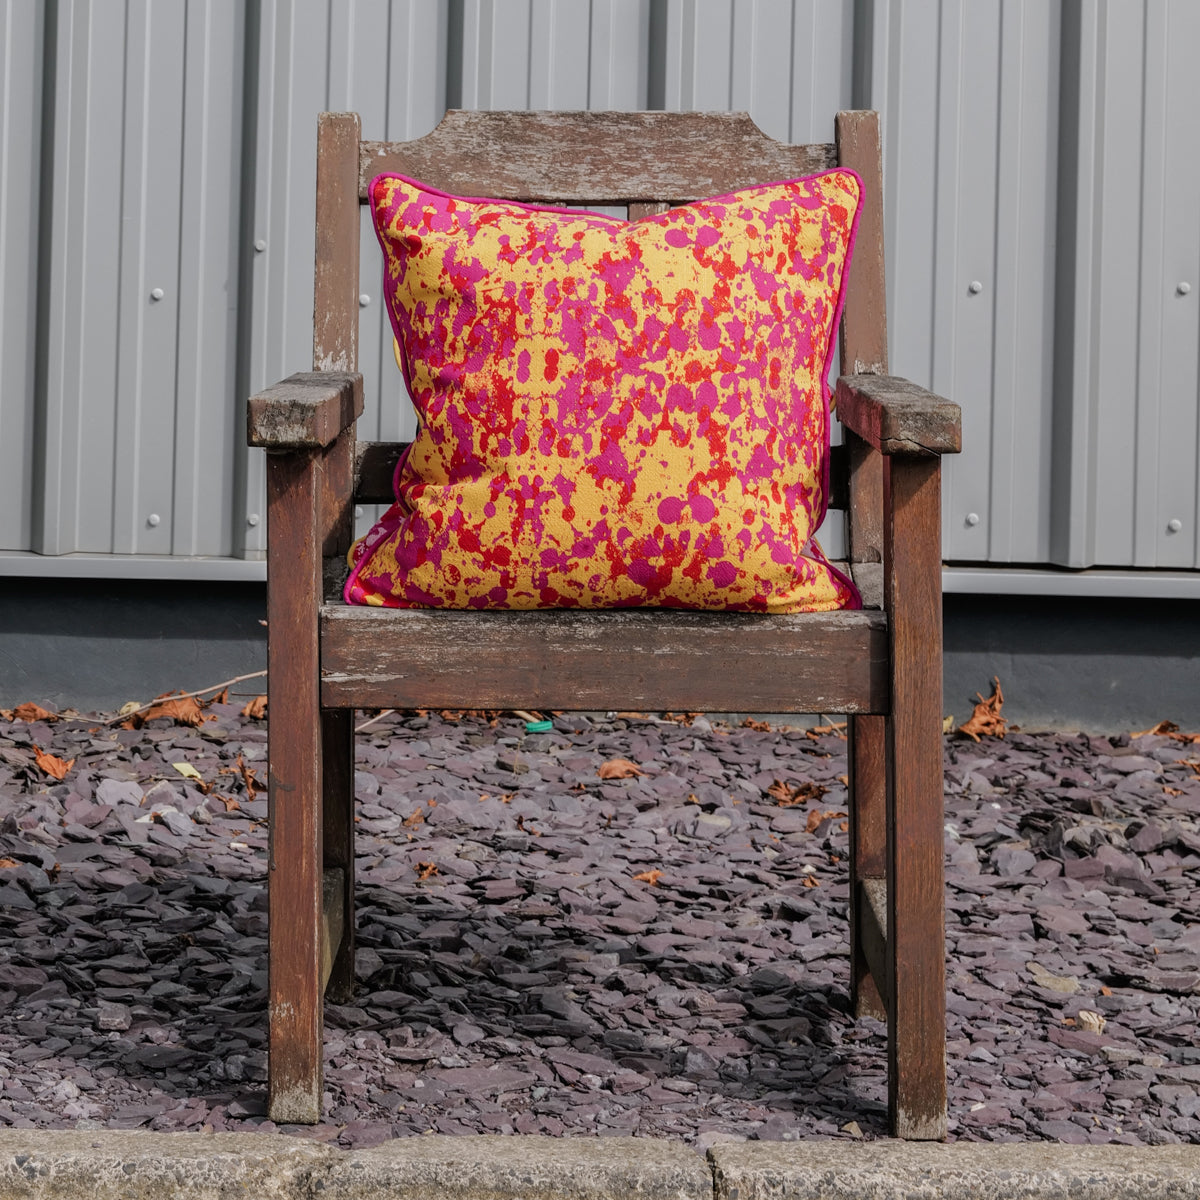 Laz Studio House Spots Cushion (Pink & Red on Yellow)